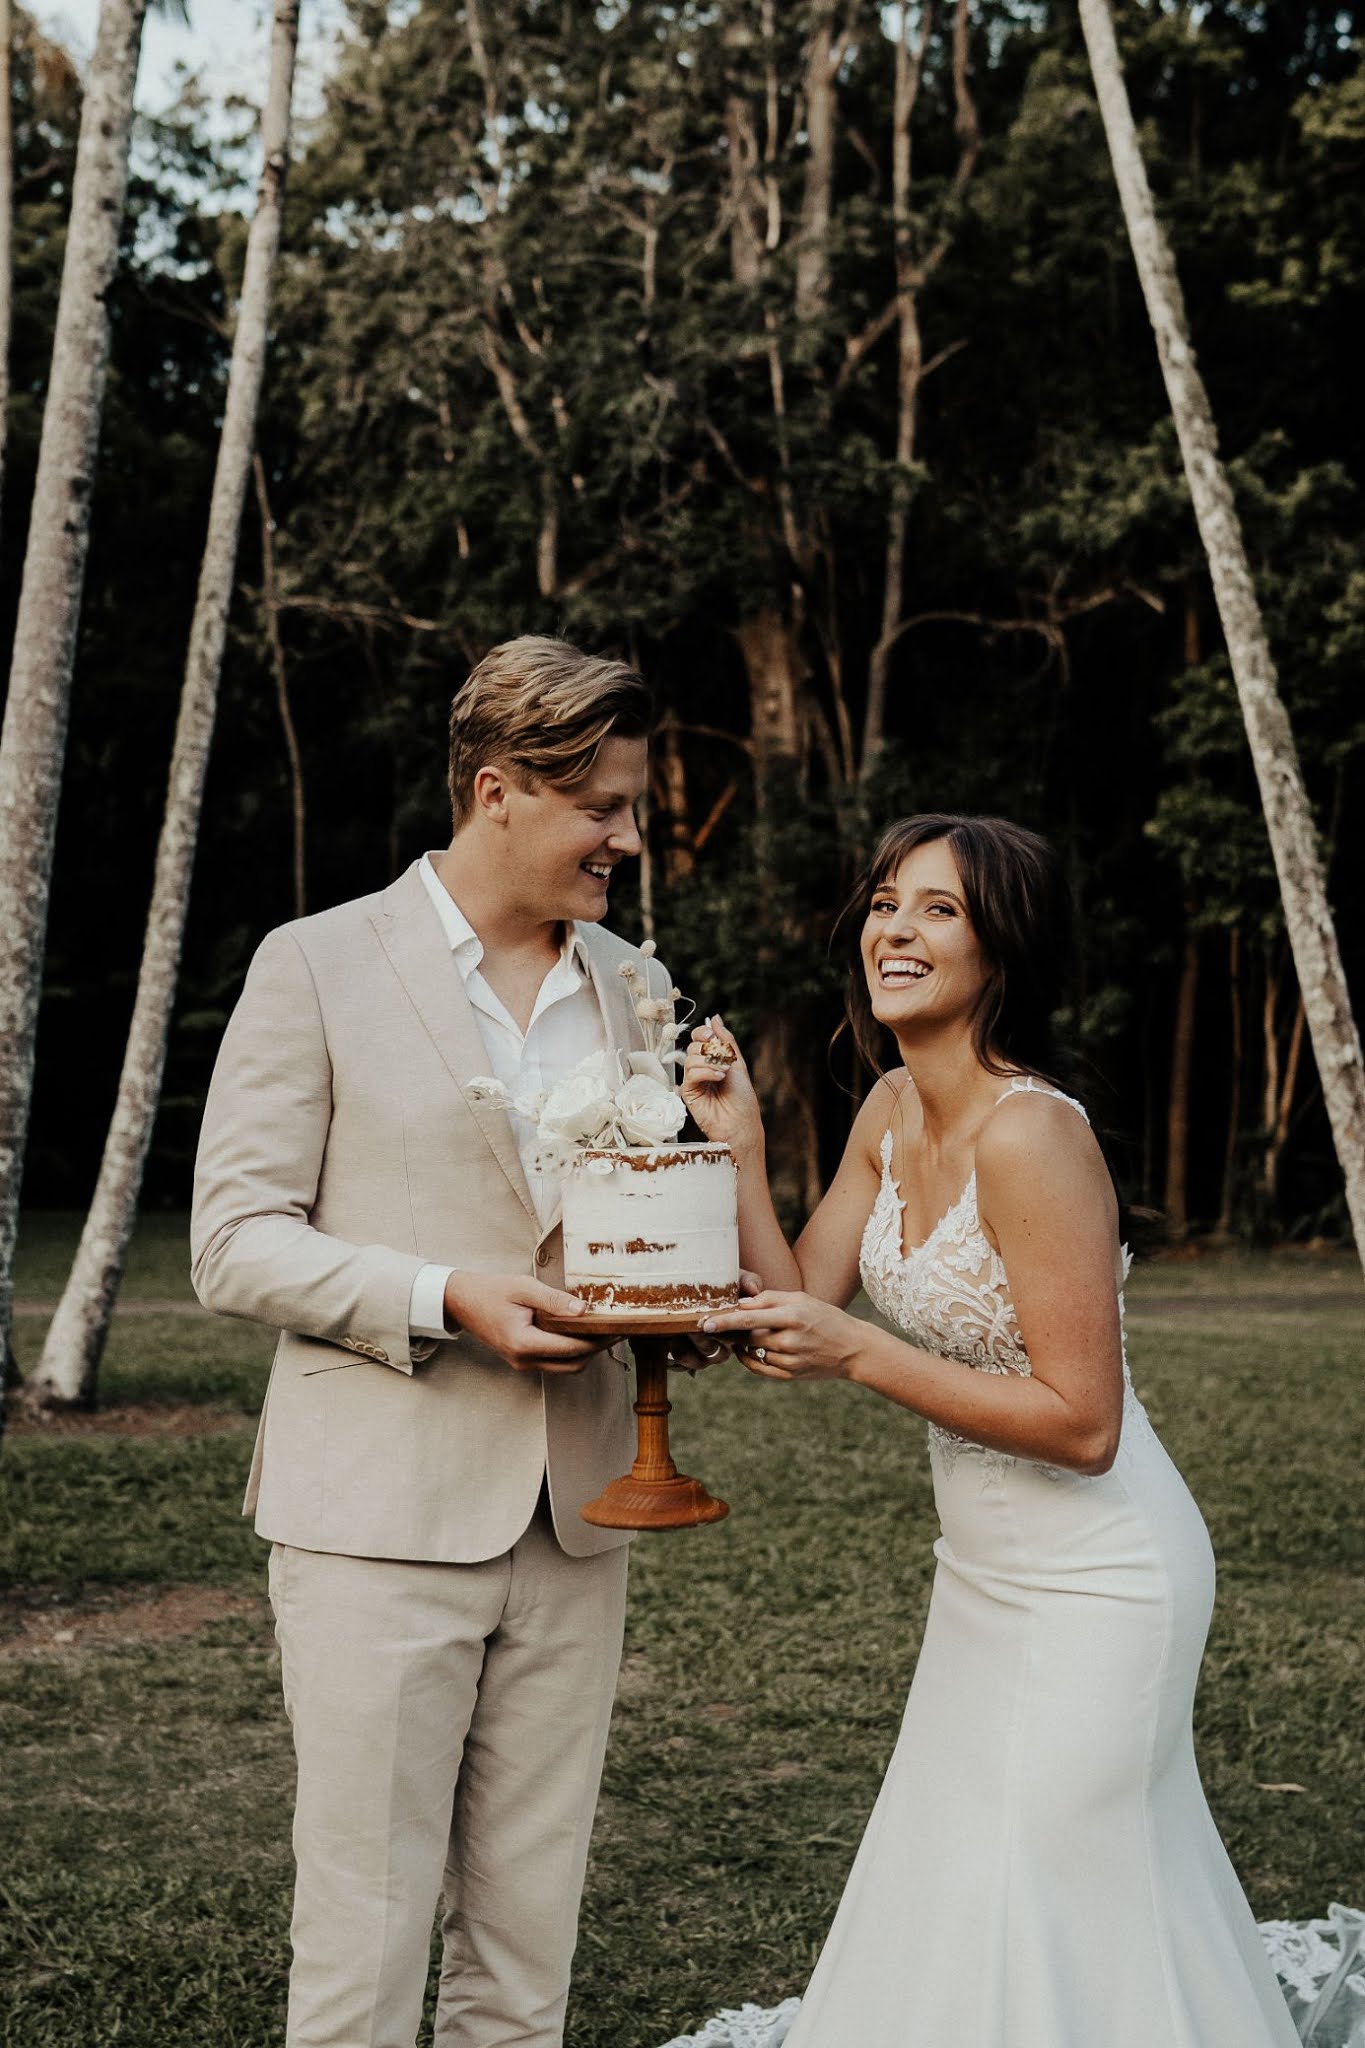 doe and deer photography gold coast bohemian styled weddings venue stationery florals